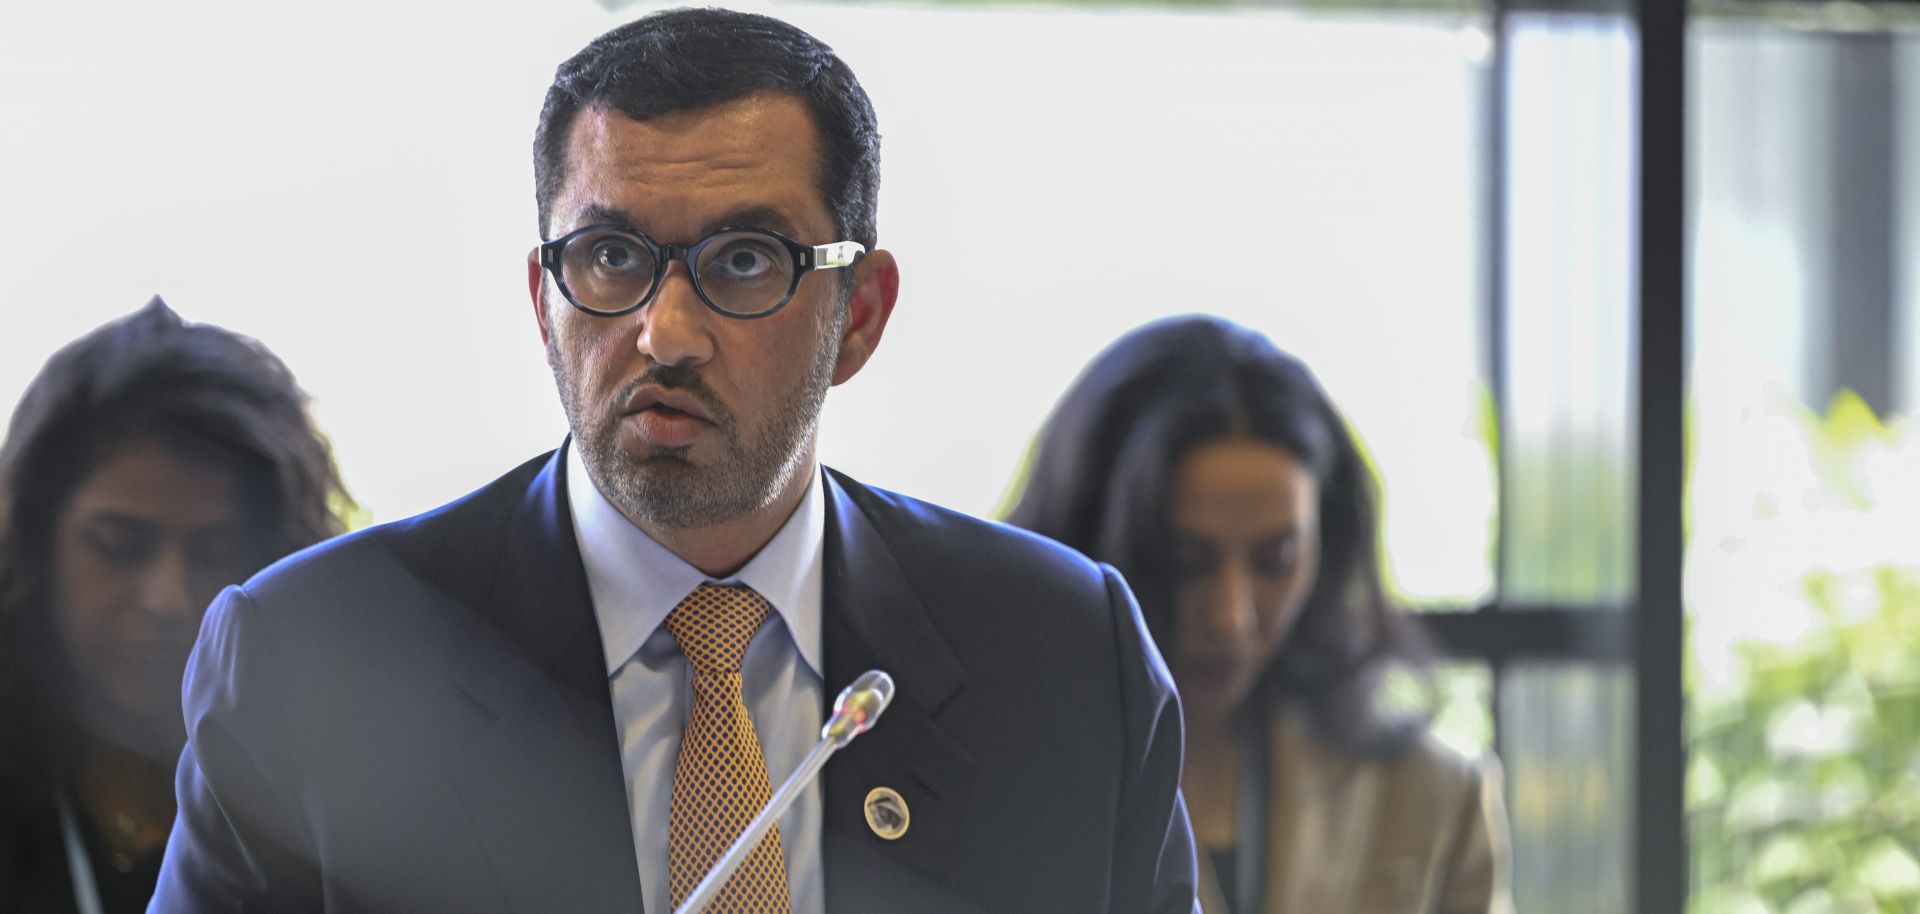 Sultan al-Jaber, the president-designate of the COP28 climate conference and CEO of the Abu Dhabi National Oil Company, speaks at the Bonn Climate Change Conference on June 8, 2023, in Bonn, Germany.